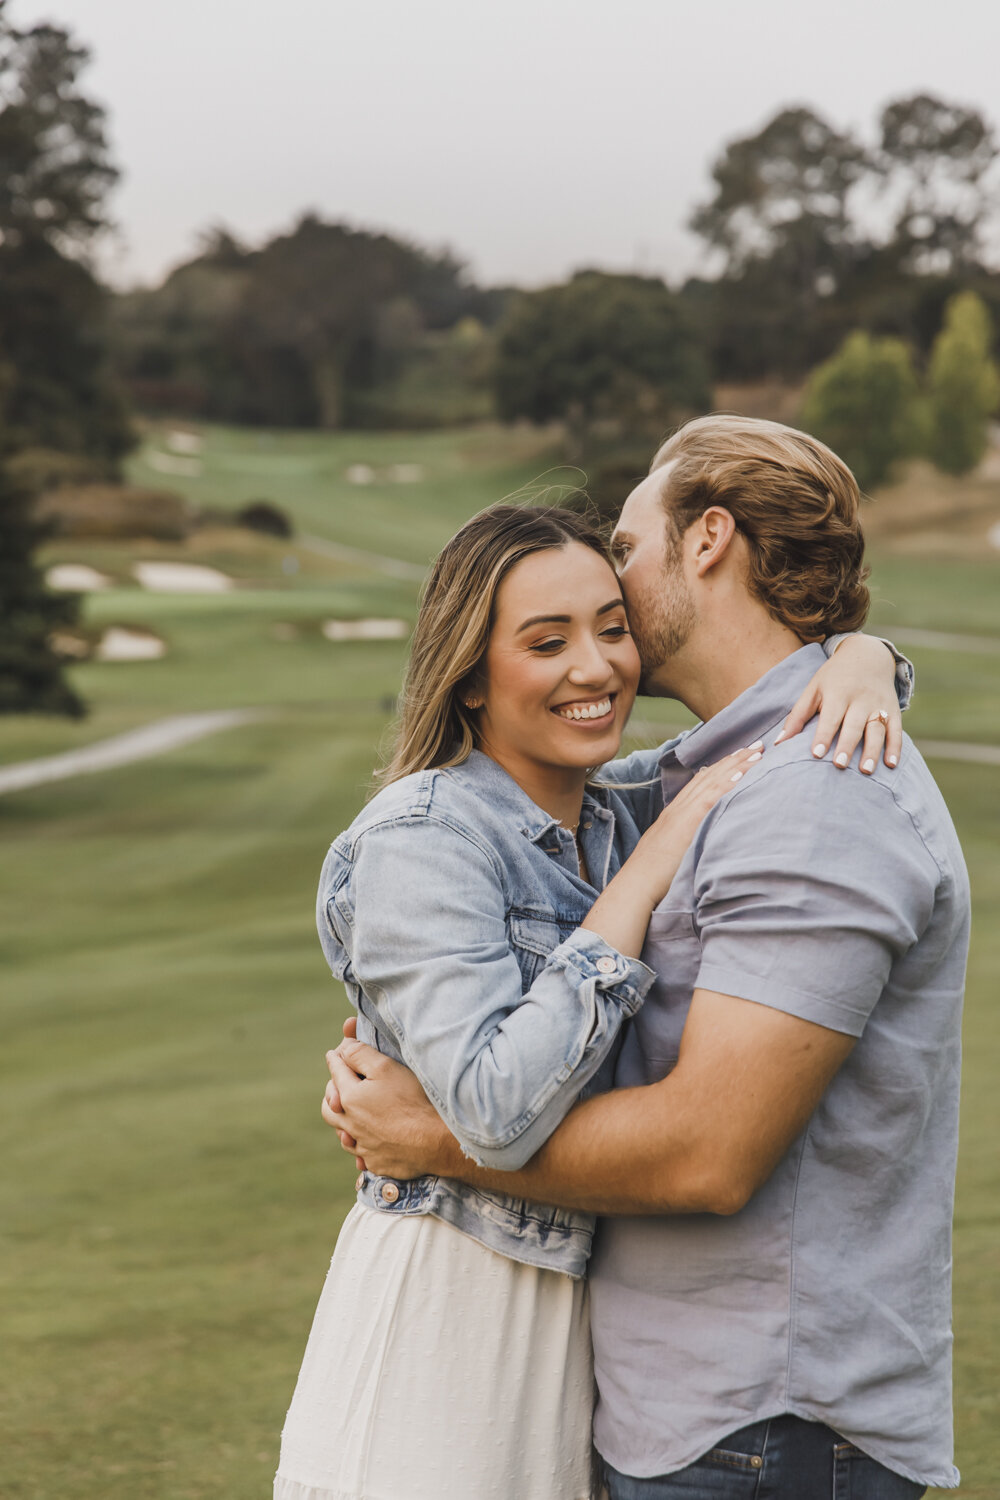 PERRUCCIPHOTO_GOLF_COURSE_ENGAGEMENT_75.jpg